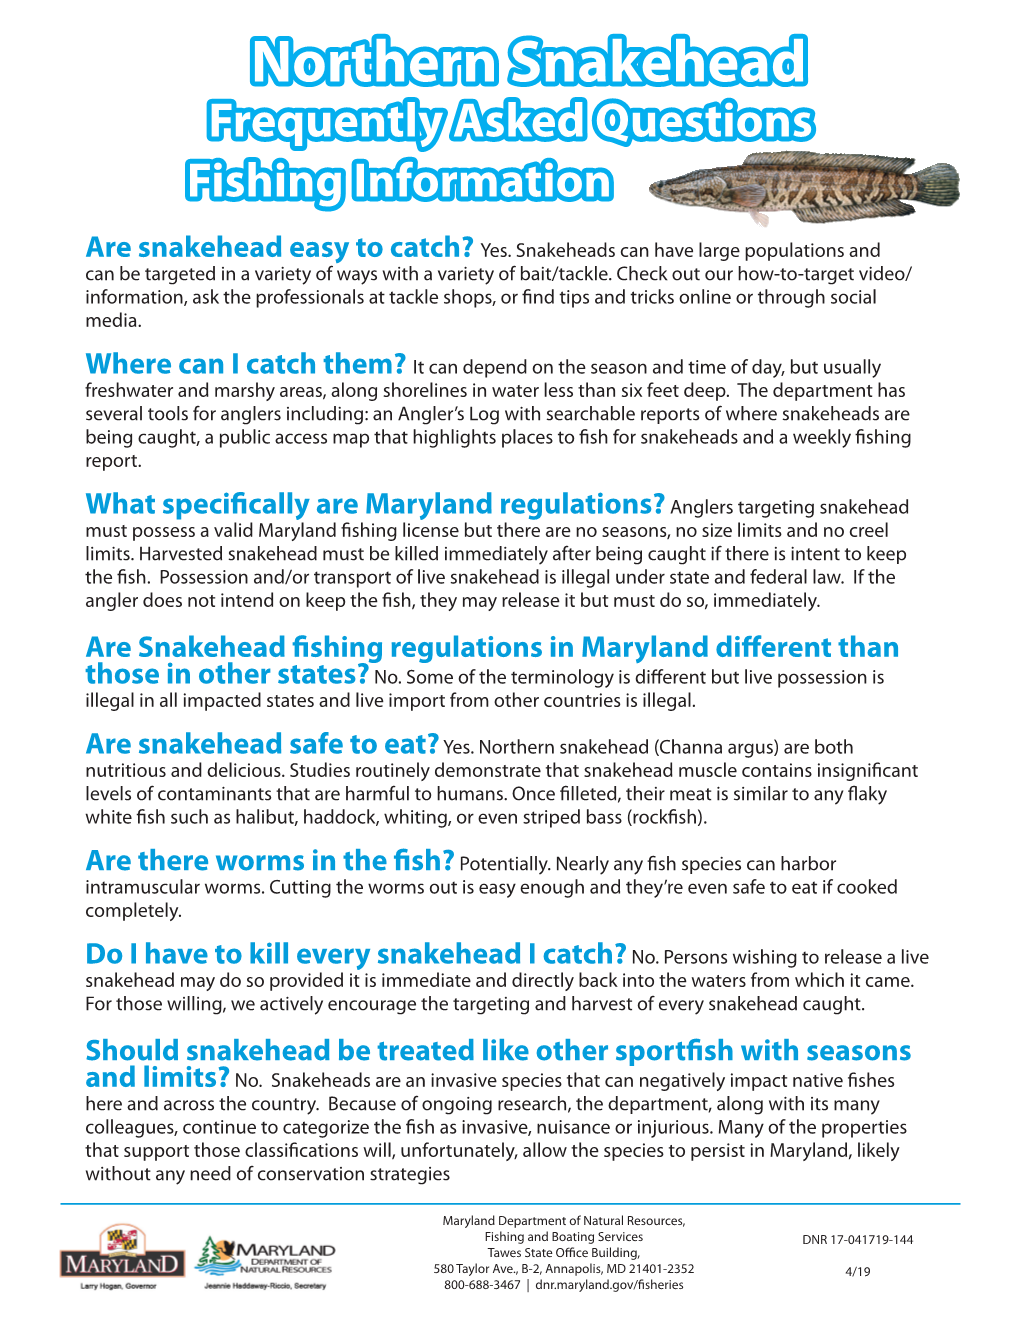 Northern Snakehead Frequently Asked Questions Fishing Information